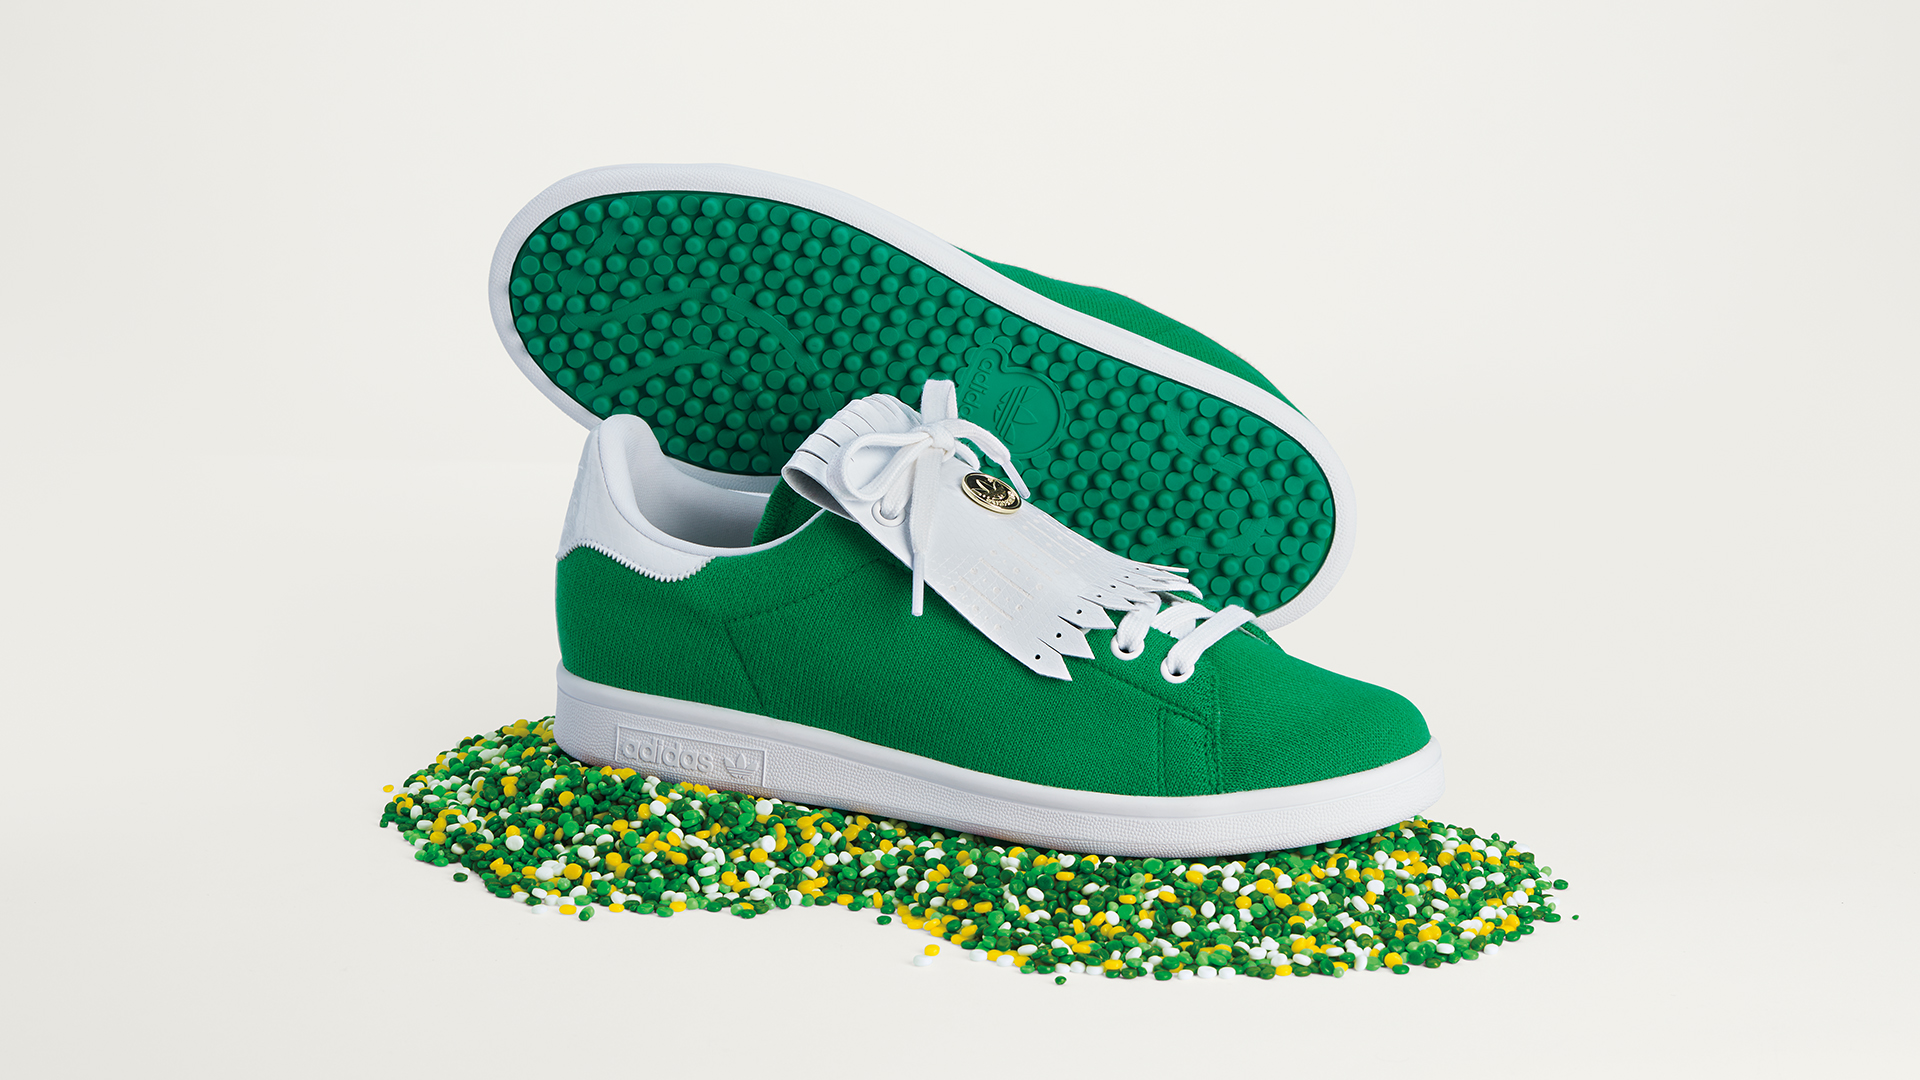 The first Adidas Stan Smith golf shoe is now available | Golf ... كتاب الانجلش